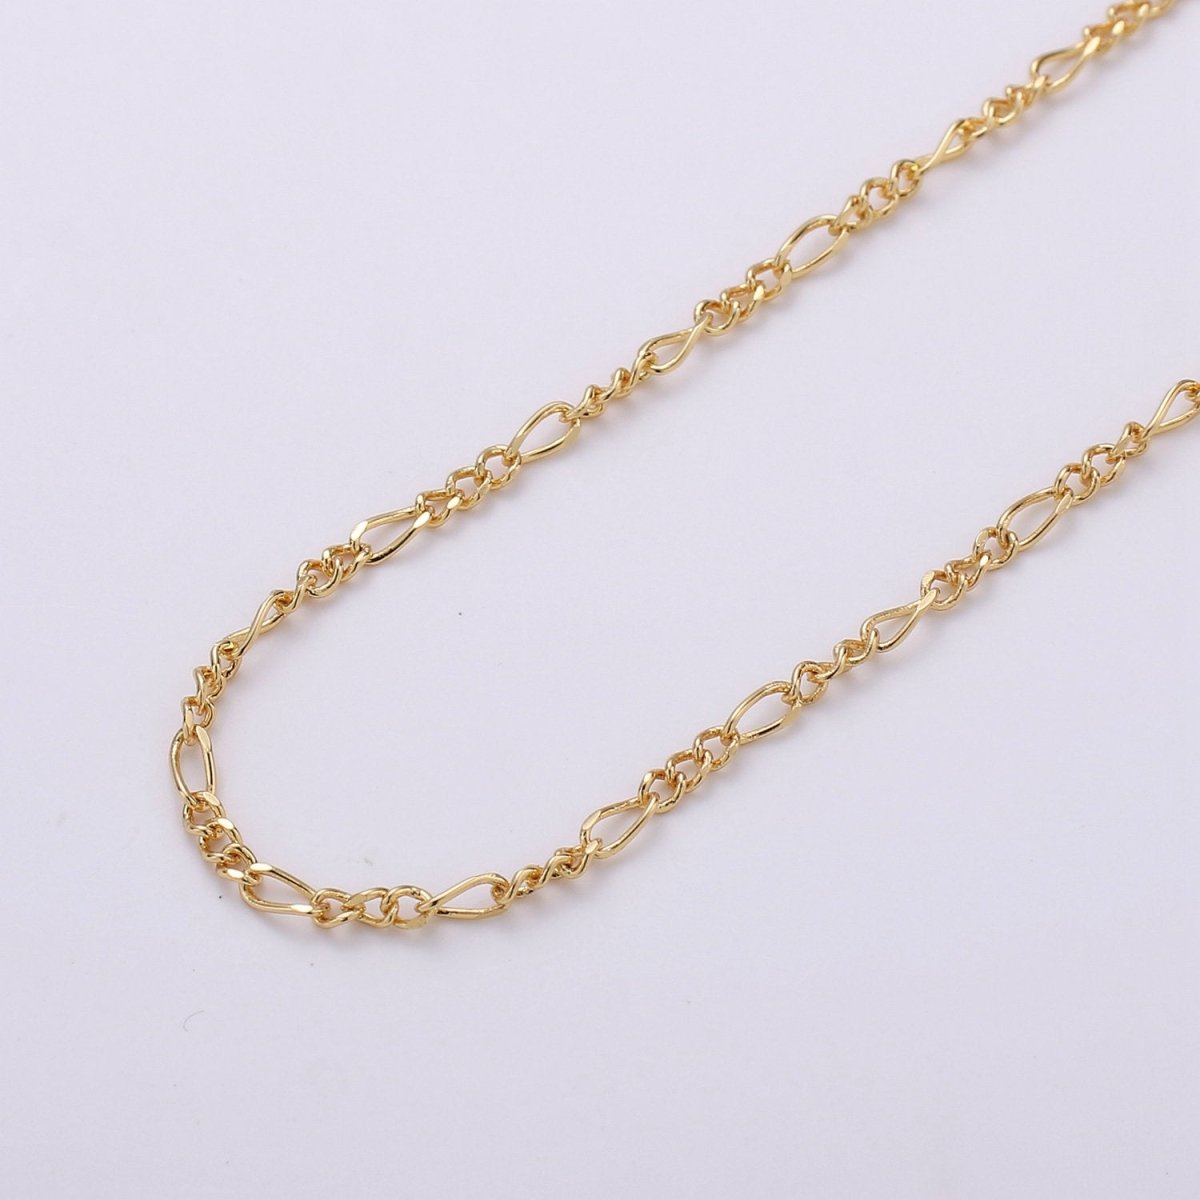 Dainty 1 yard 2mm 16K Gold Filled Figure Eight FIGARO Chain, Gold Figure Eight Chain, Figure 8 Chain Necklace for Jewelry Making Supply | ROLL-156 Overstock Clearance Pricing - DLUXCA